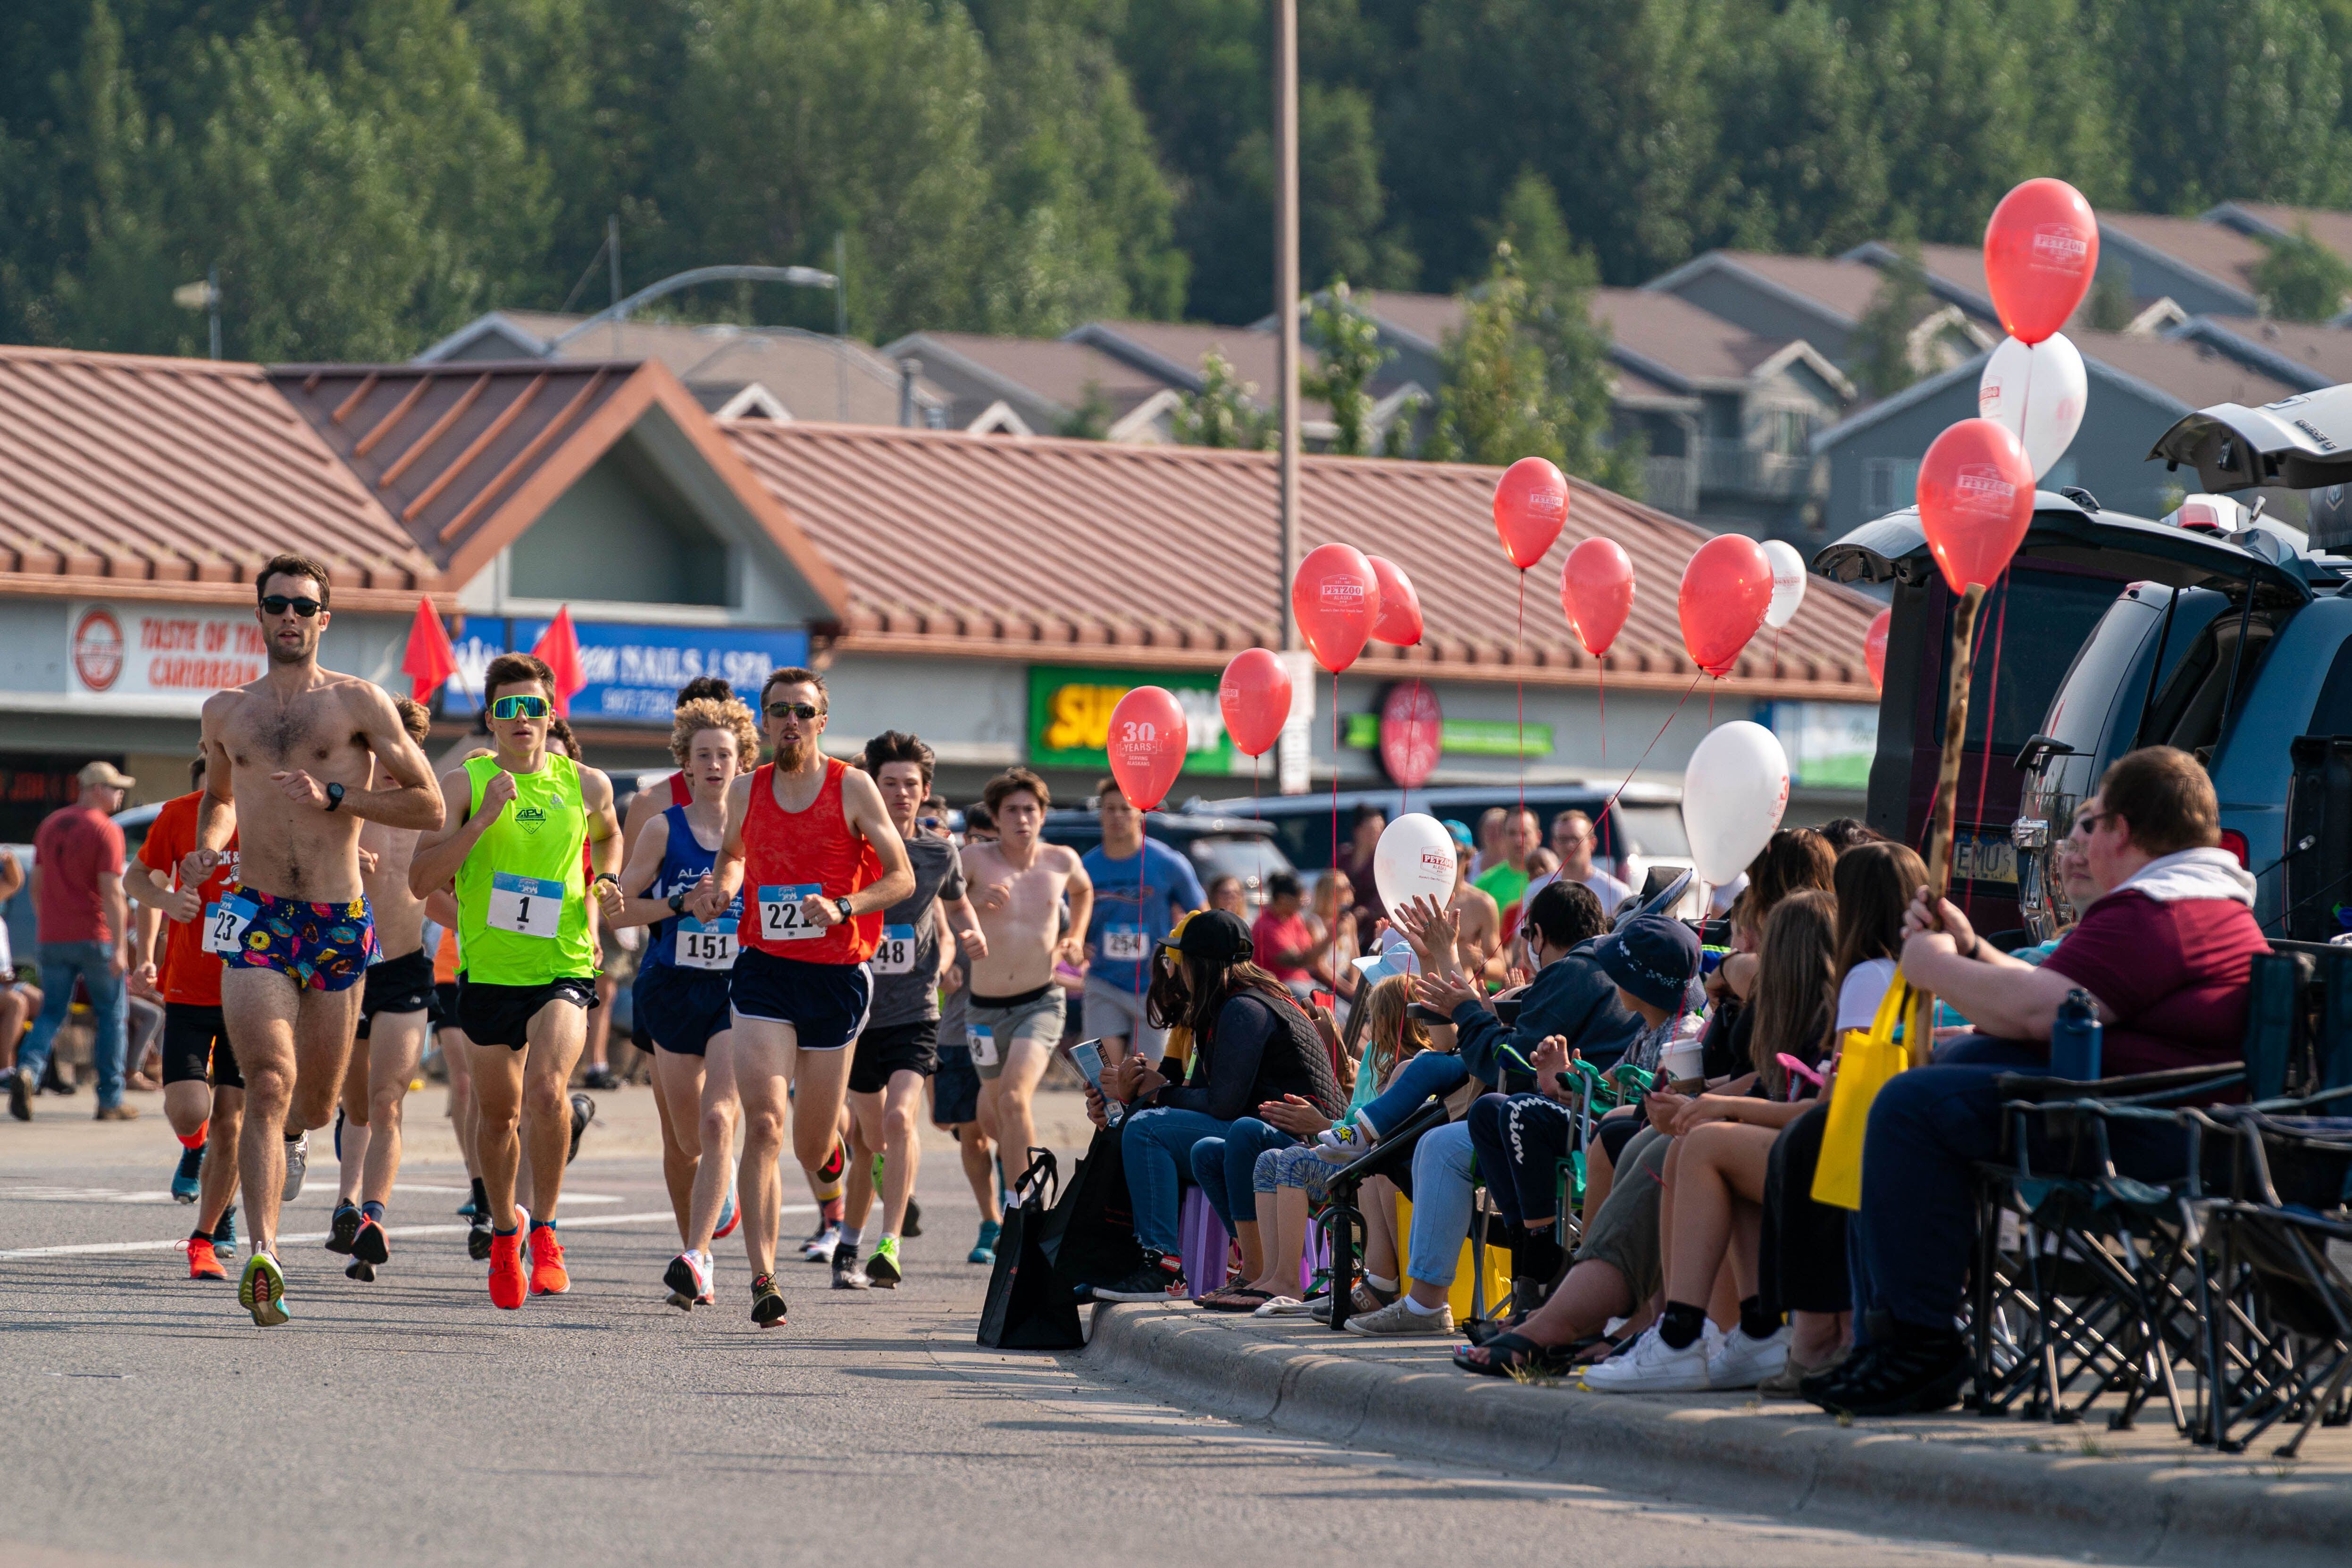 Nearly 400 run 5K race at Bear Paw Festival - Anchorage Daily News